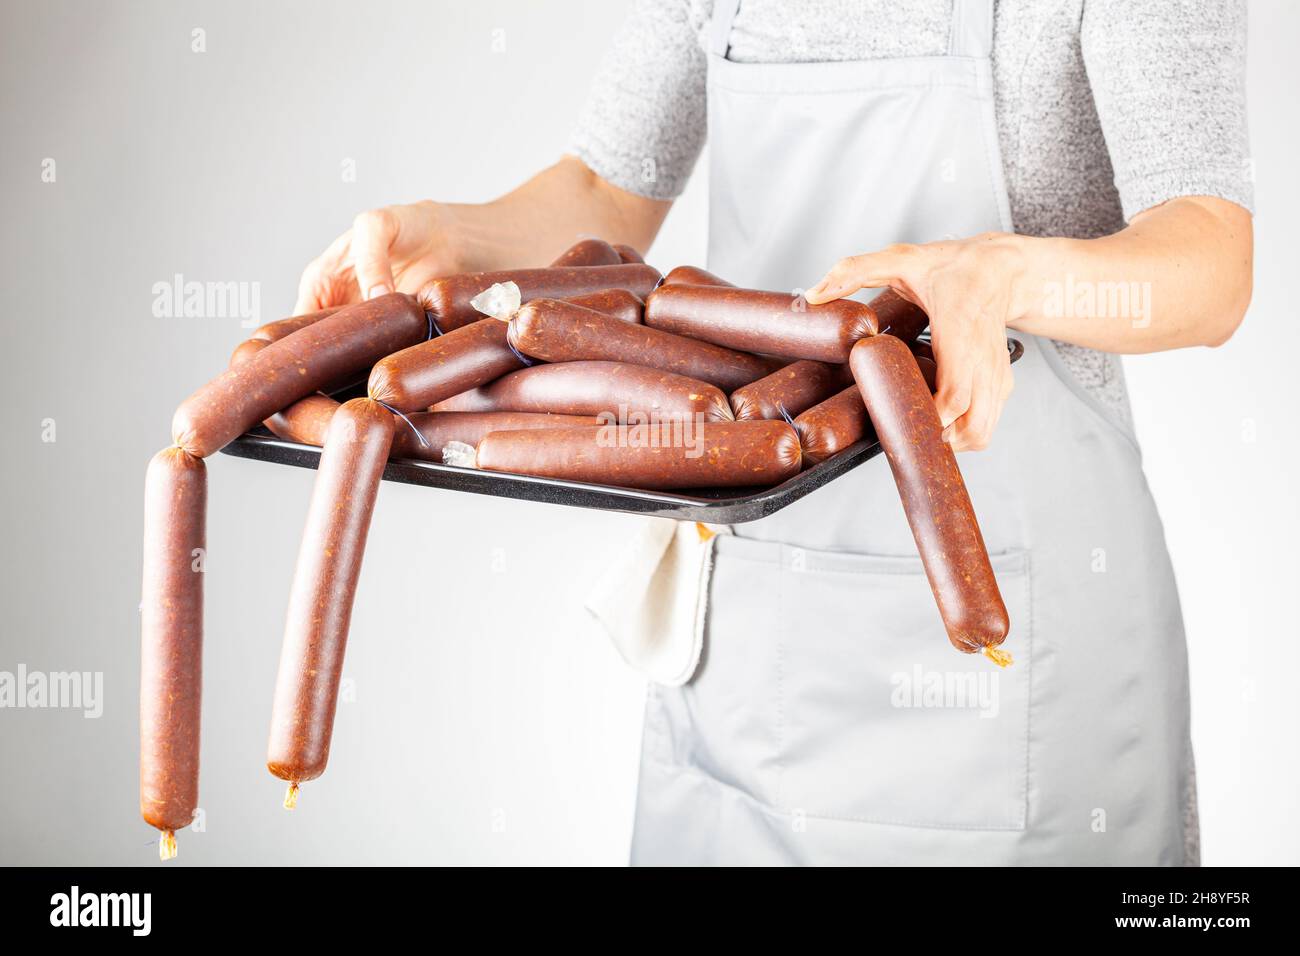 A woman chef is showing a heap of homemade Turkish sucuk or sausage on a tray. Processed fermented spicy red meat consumption concept. Stock Photo